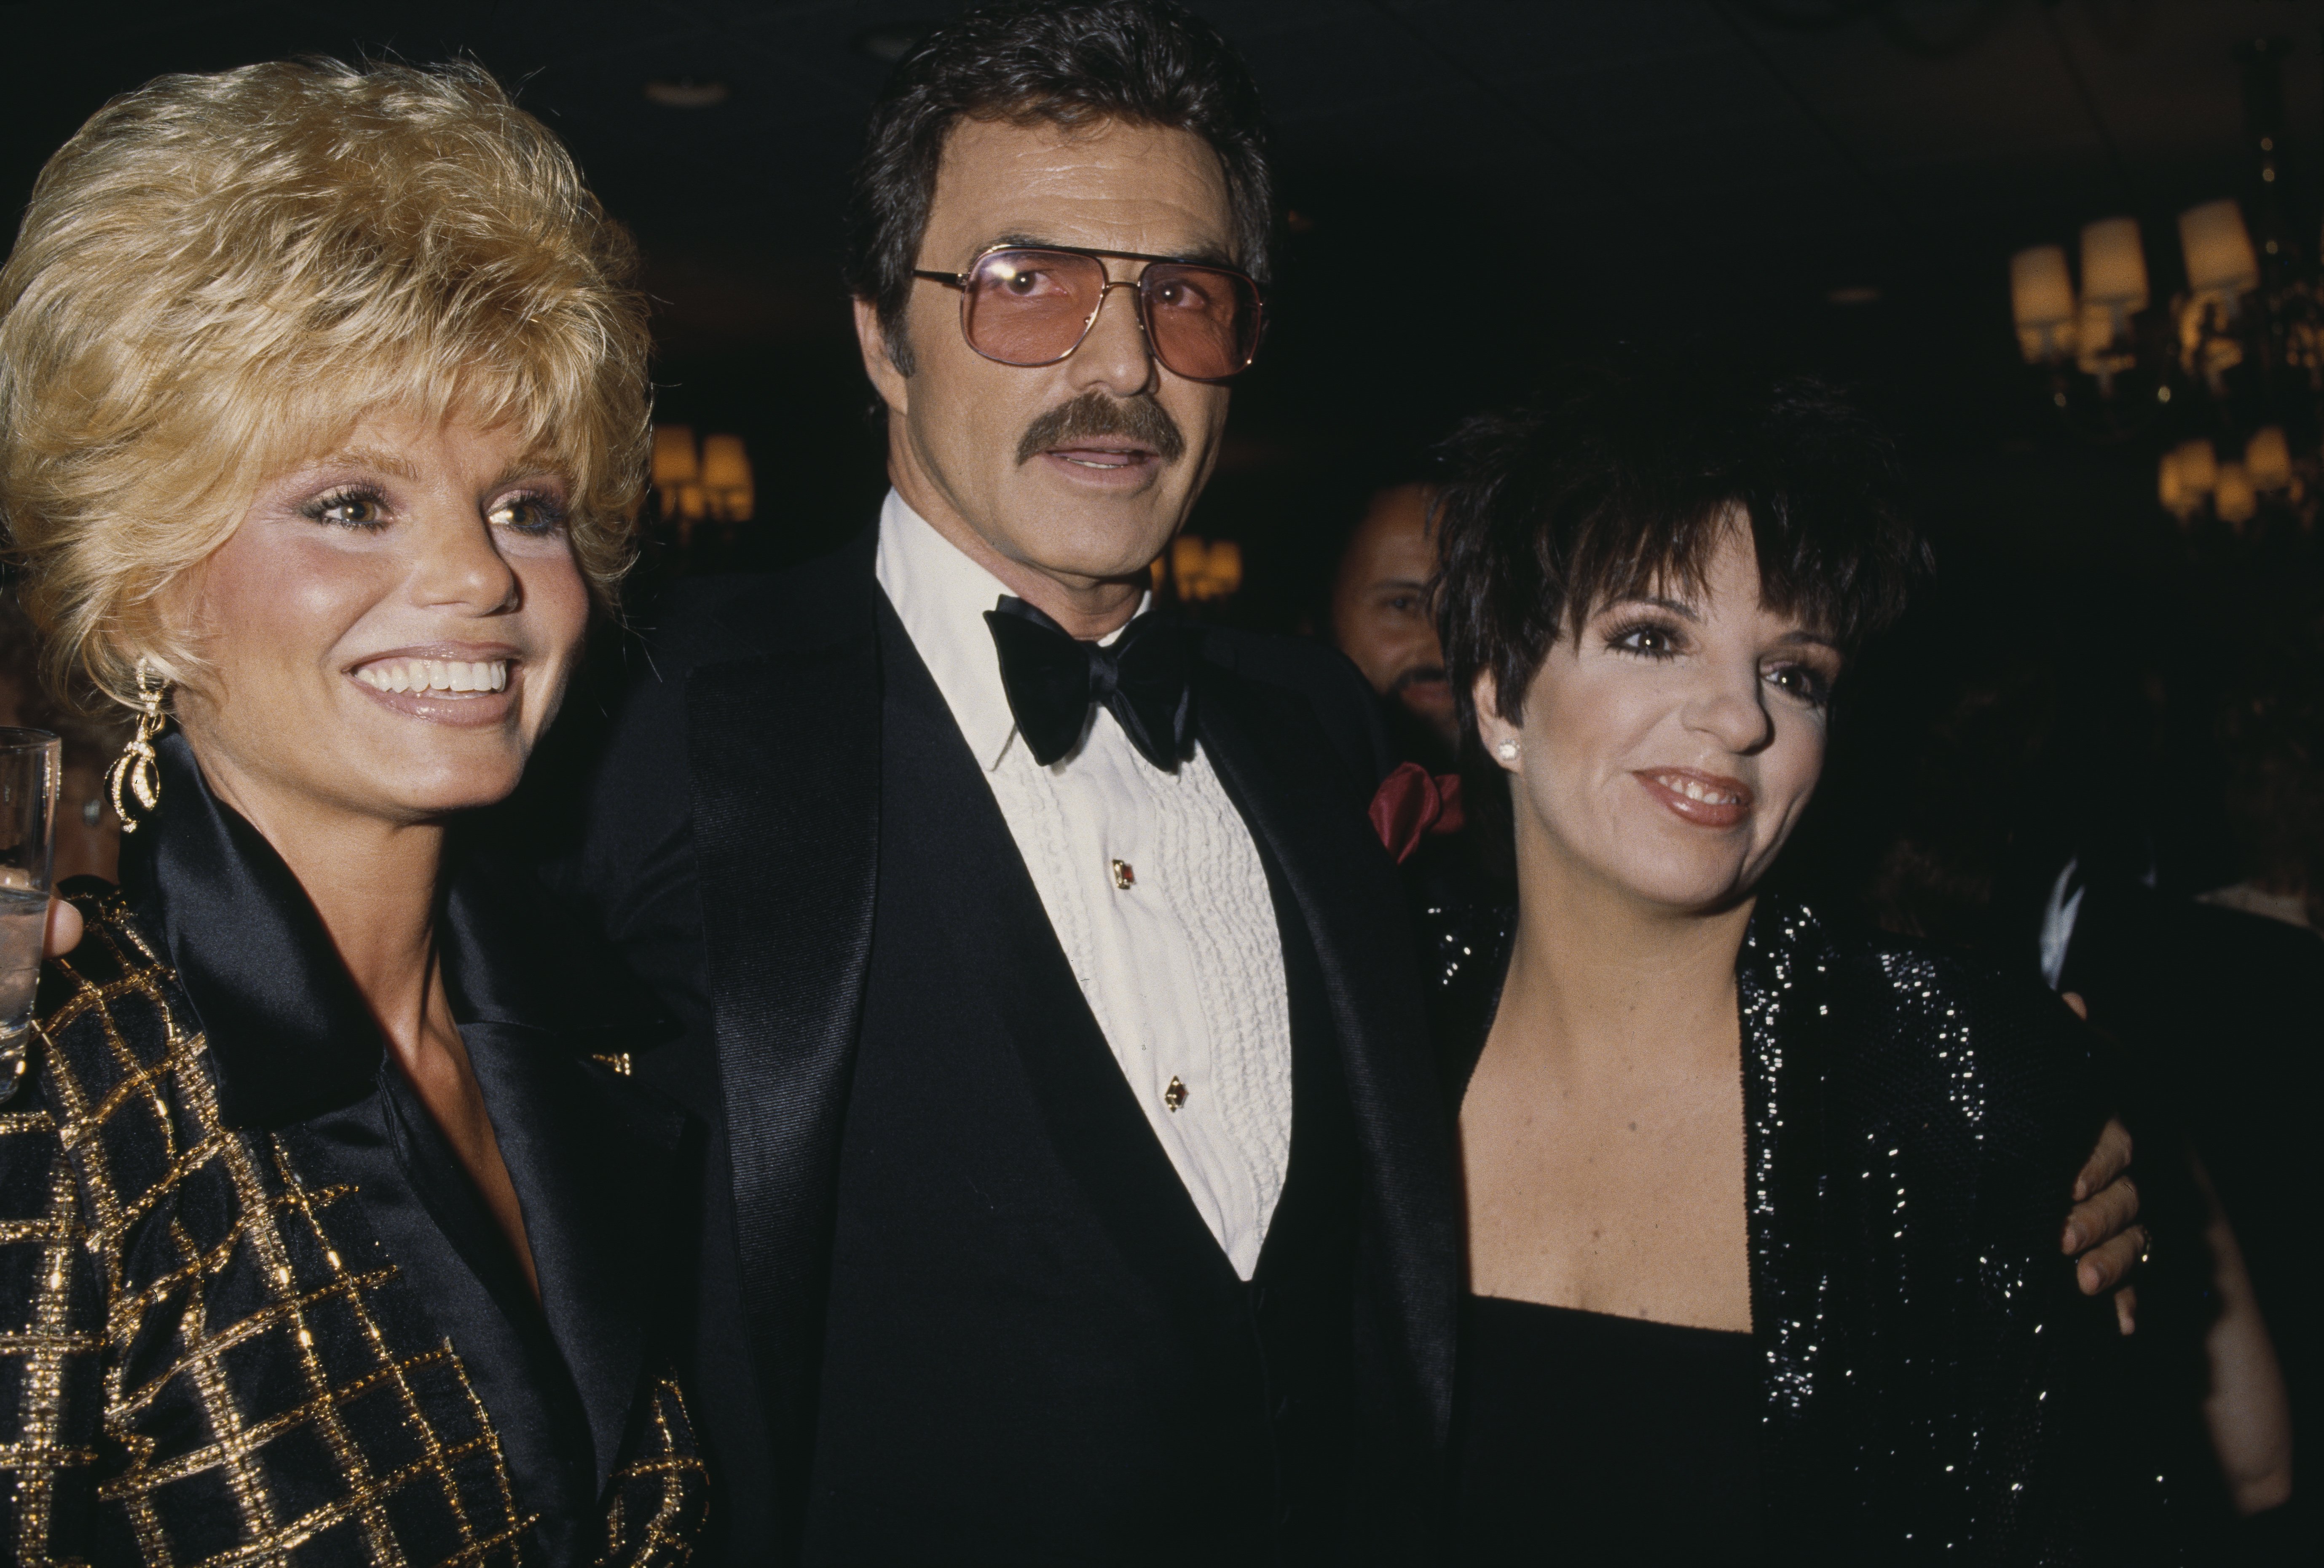 Loni Anderson, Burt Reynolds and singer Liza Minnelli attend the Friars Club of California's 8th Annual Lifetime Achievement Award Salute to Liza Minnelli, held at the Century Plaza Hotel in Los Angeles, California, 5th April 1987. | Source" Getty Images